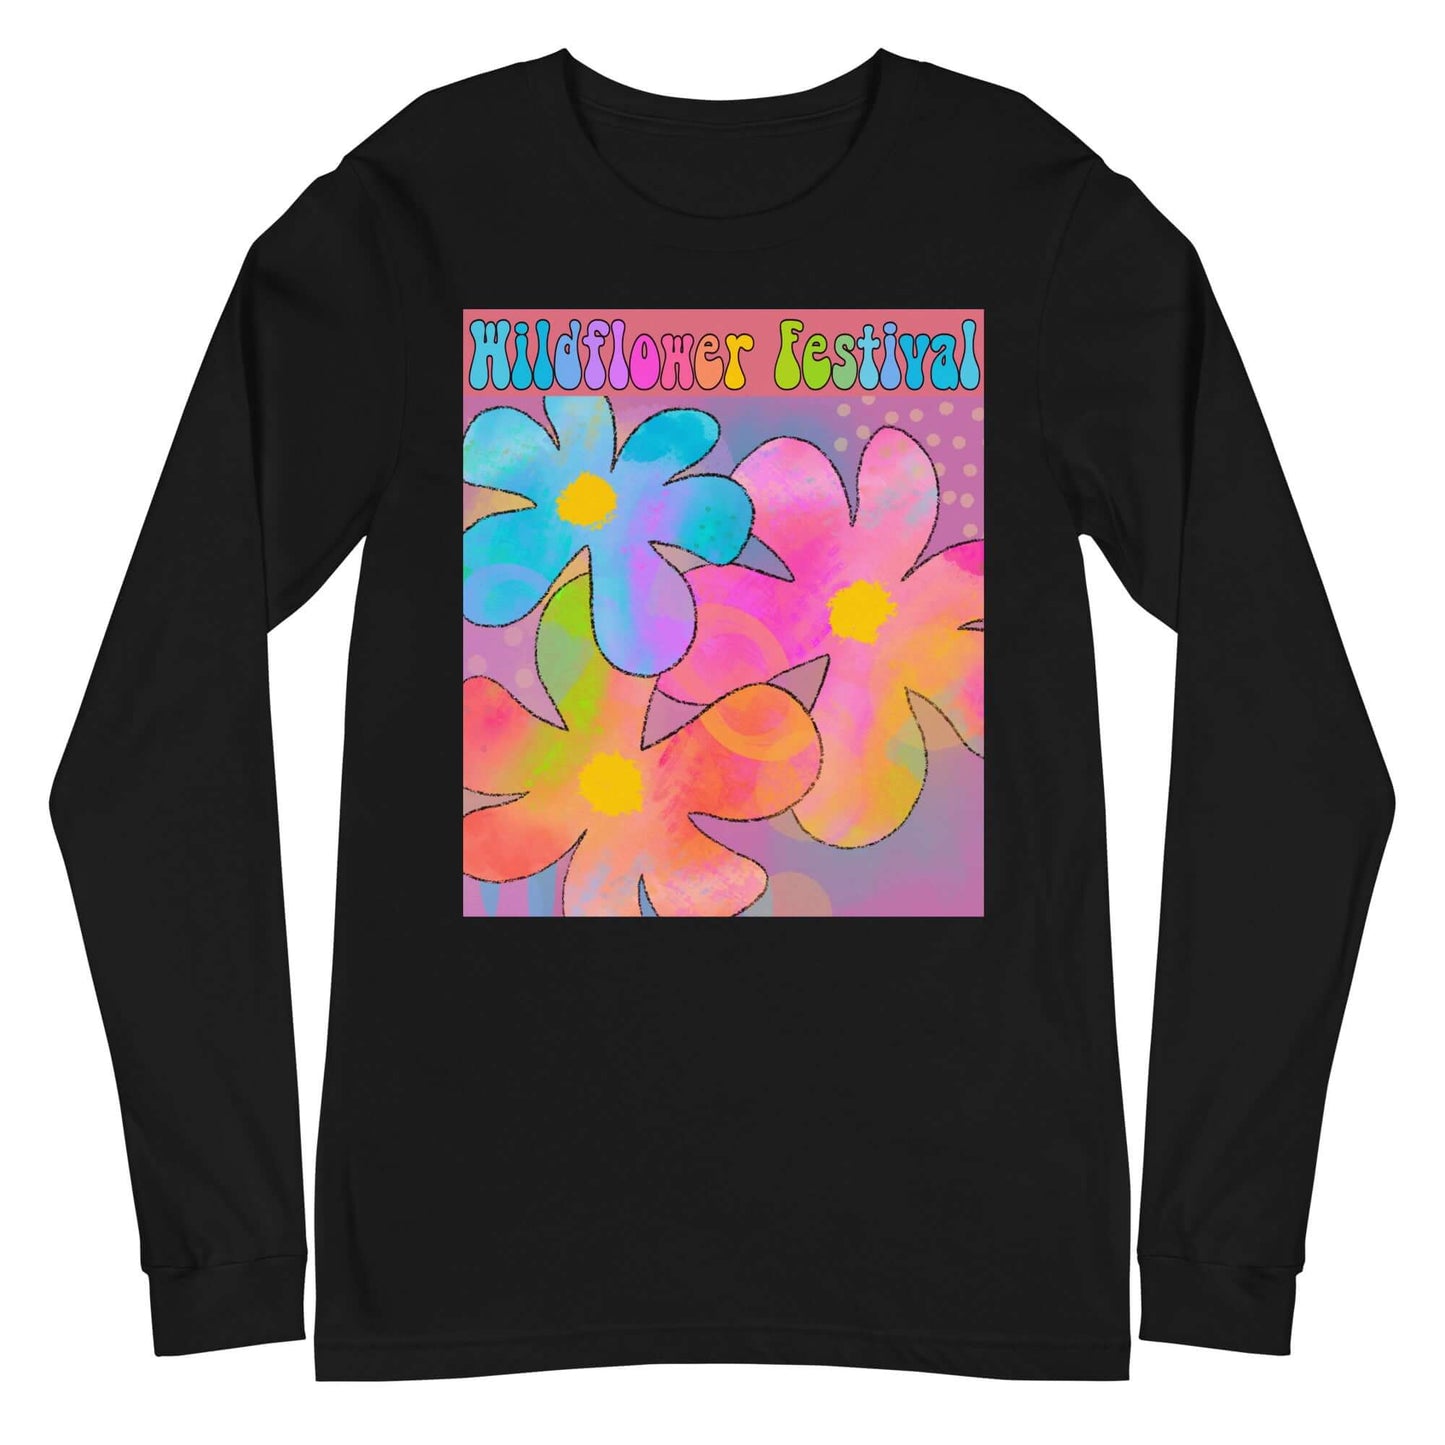 Big Colorful Hippie 1960s Psychedelic Flowers with Text “Wildflower Festival” Unisex Long Sleeve Tee in Black